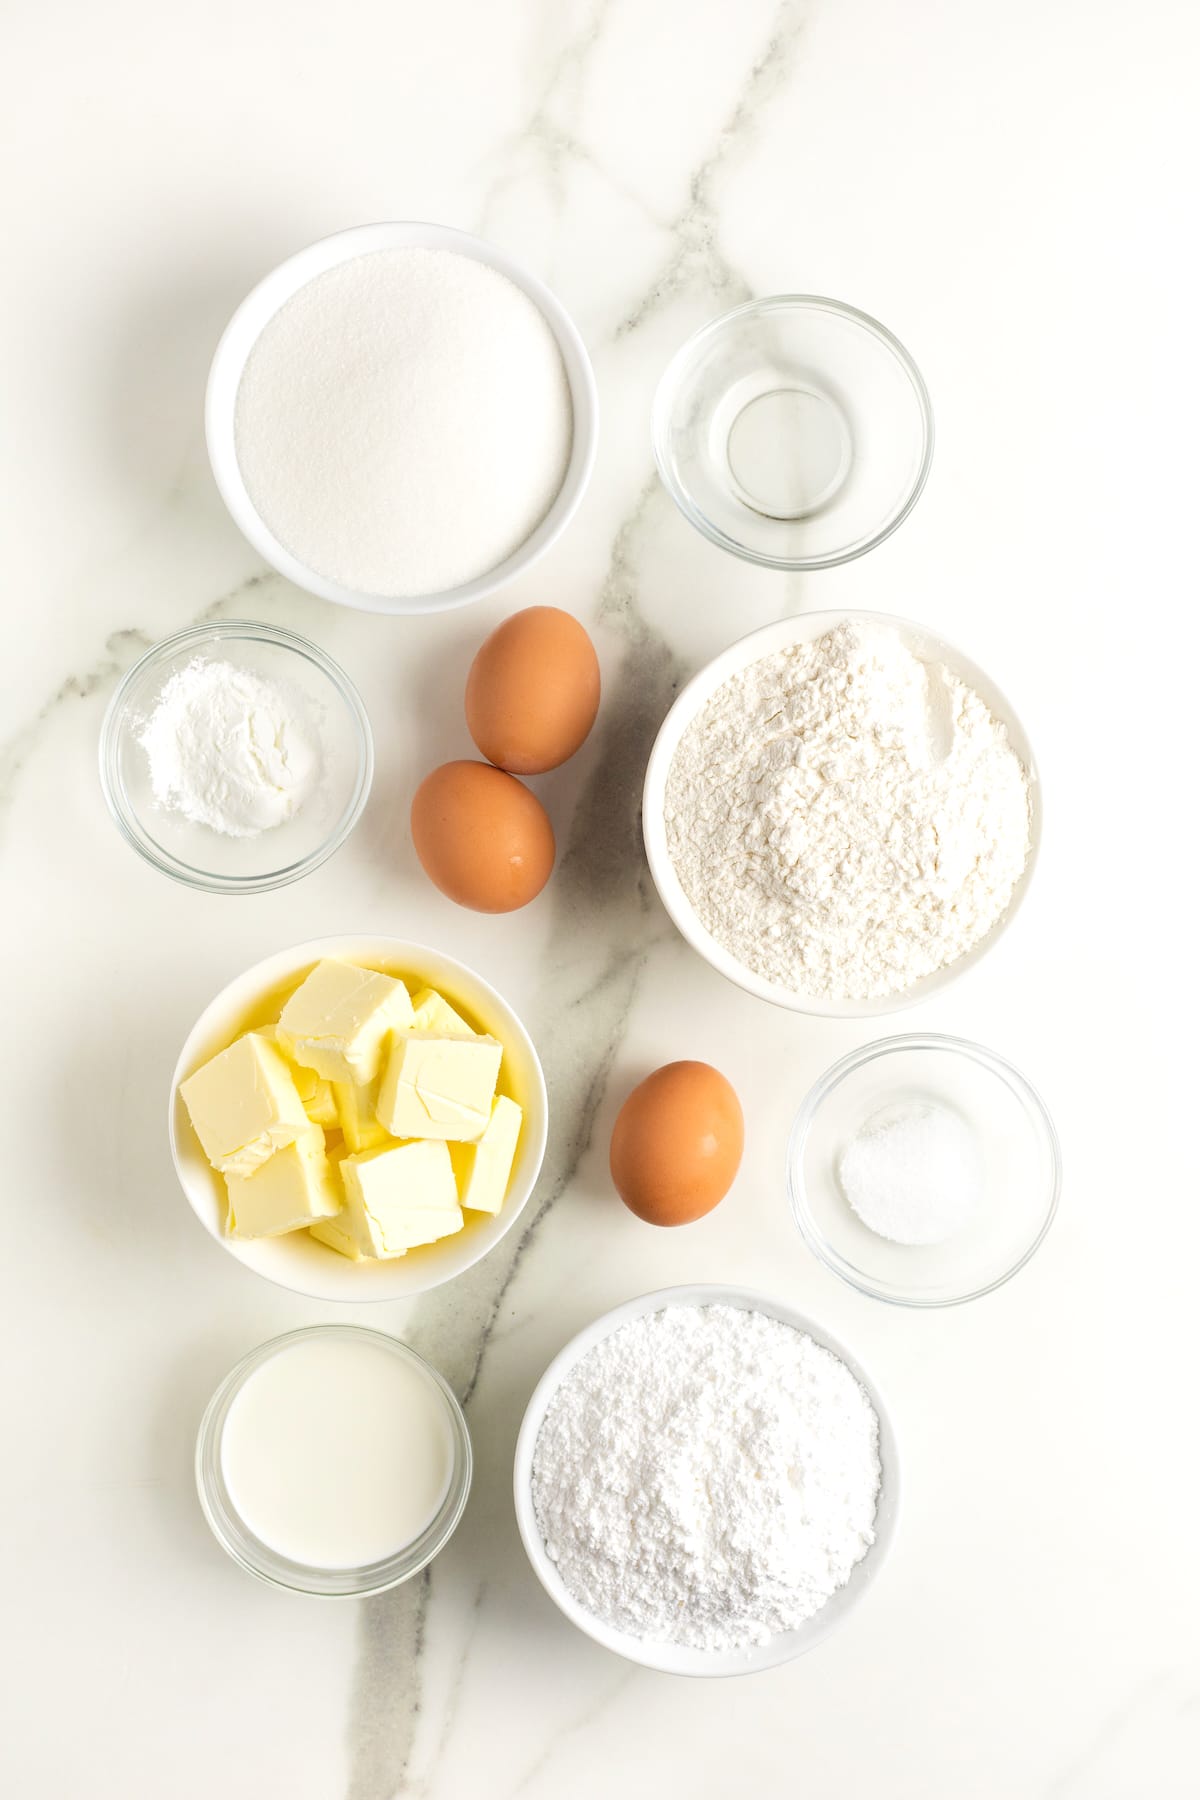 All the ingredients to make sugar cookies in small glass dishes on a white counter.